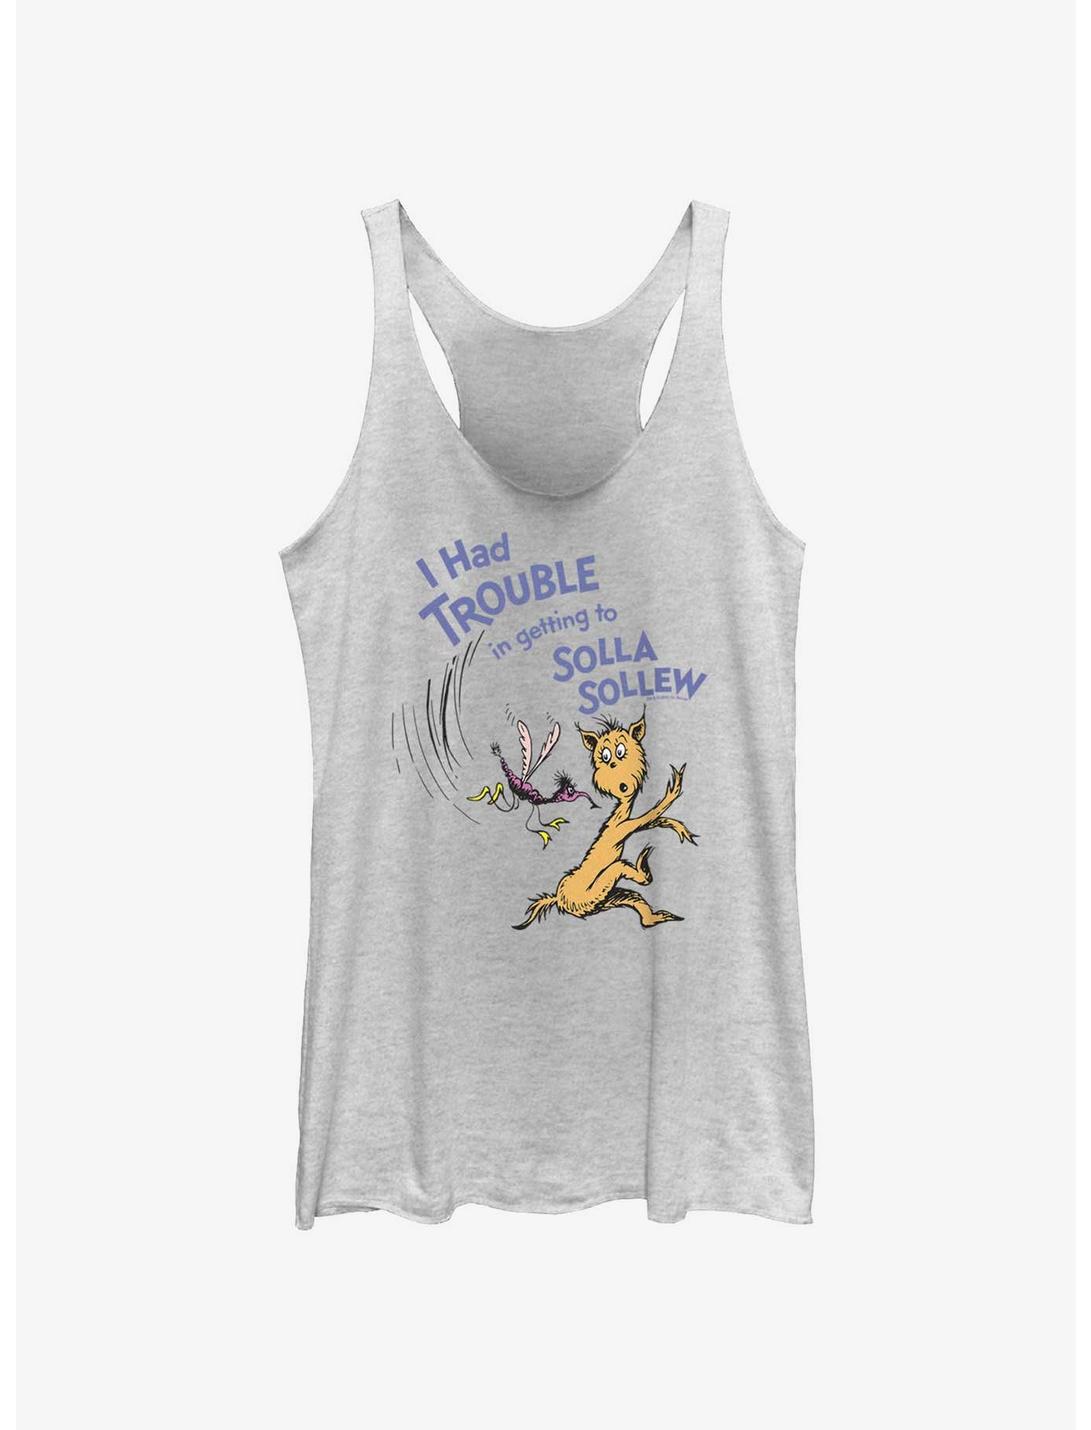 Dr. Seuss's I Had Trouble Getting Into Solla Sollew Trouble Womens Tank Top, WHITE HTR, hi-res